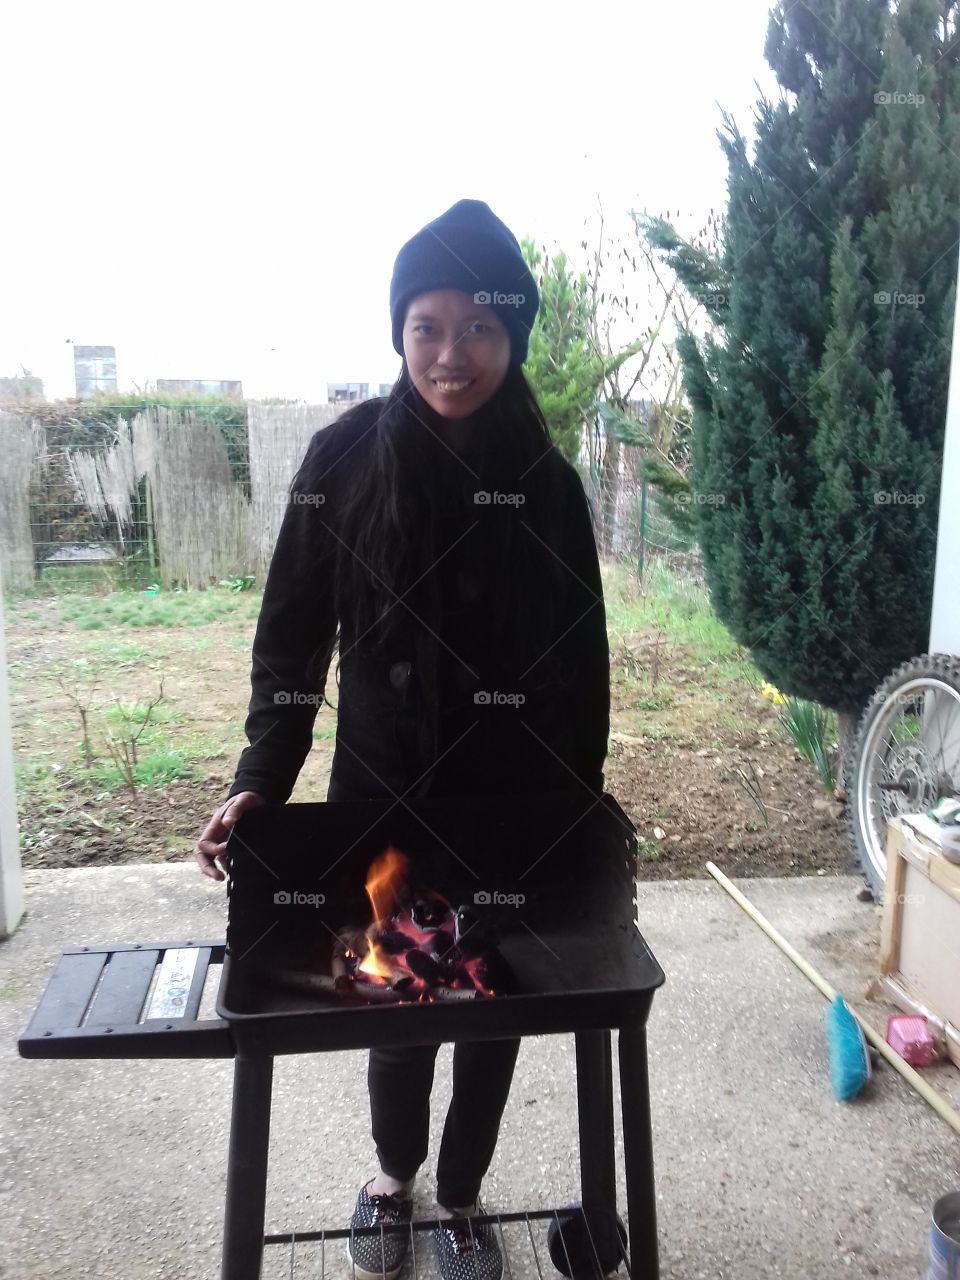 making fire for barbecue